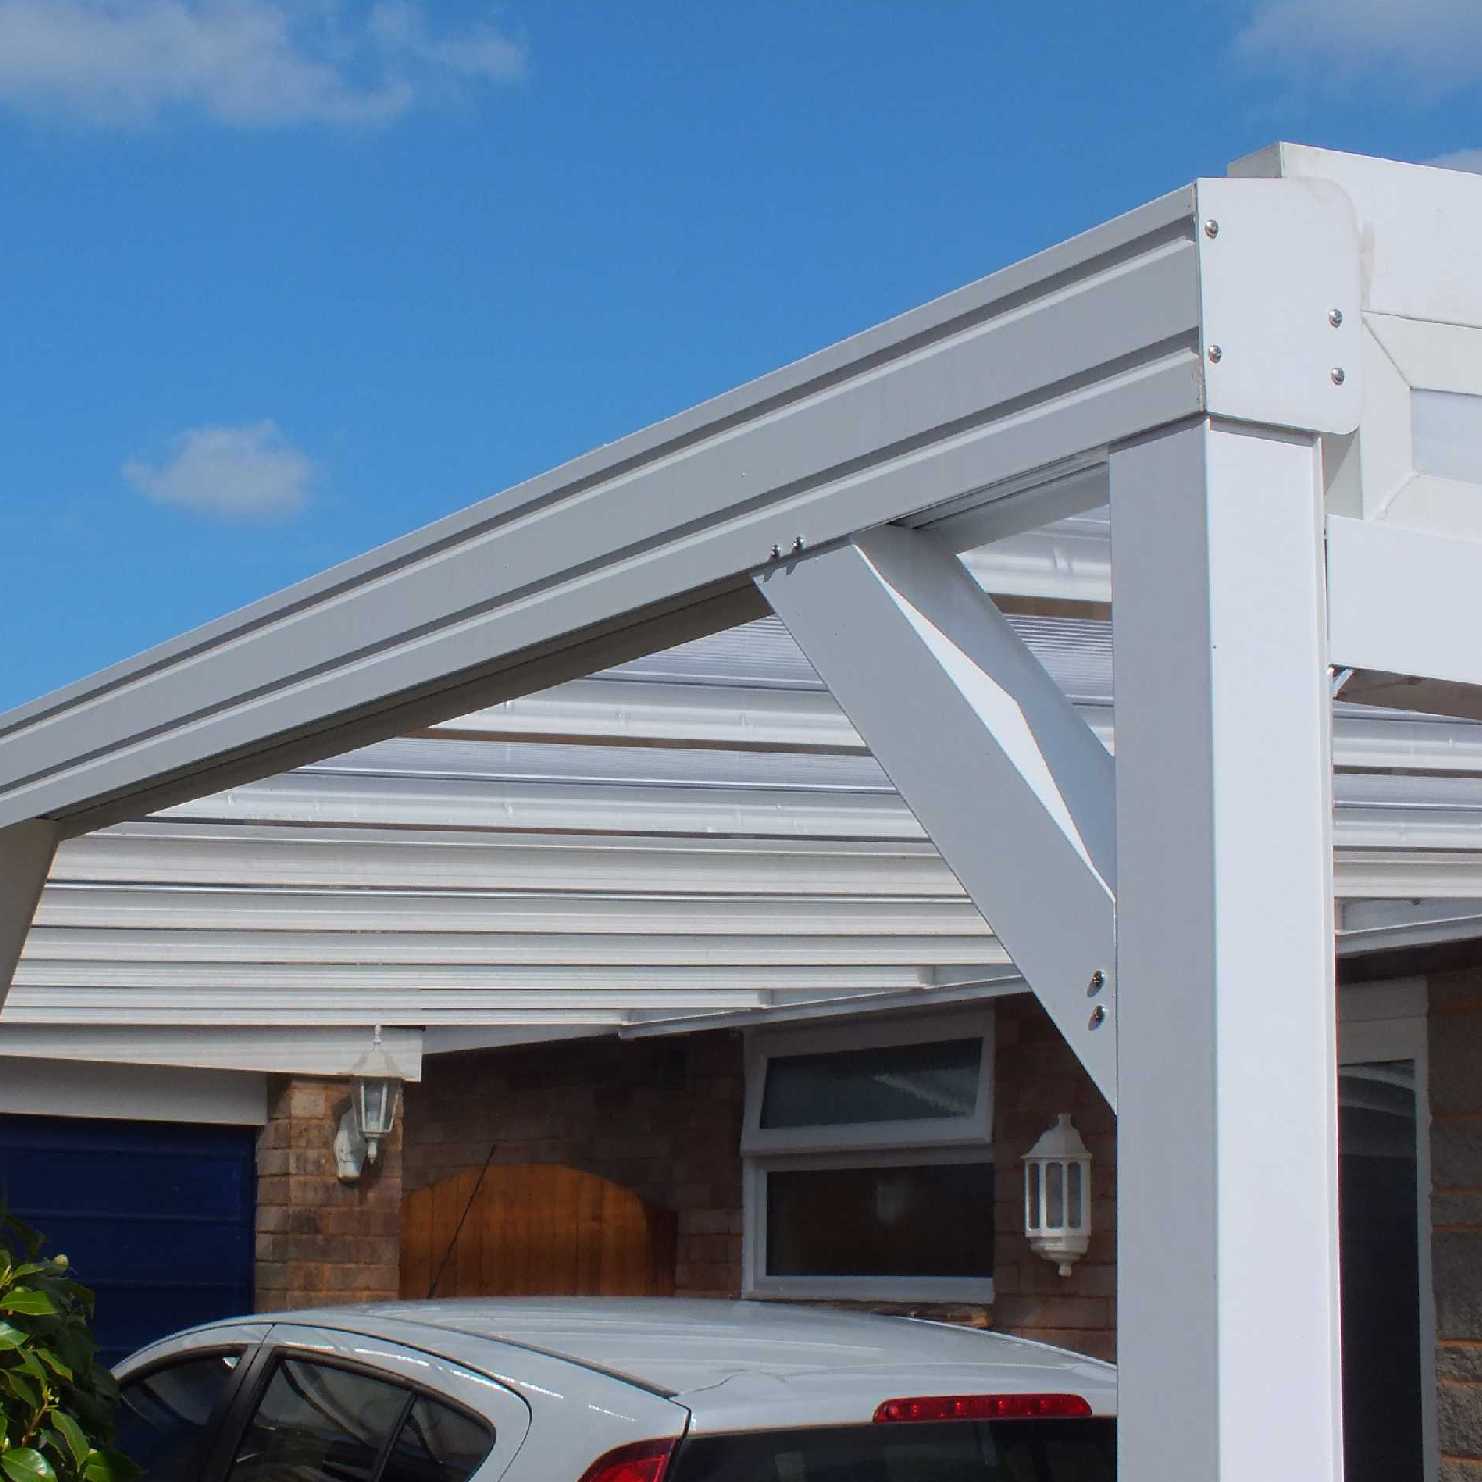 Great deals on Omega Smart Lean-To Canopy, White with 16mm Polycarbonate Glazing - 8.4m (W) x 3.0m (P), (4) Supporting Posts